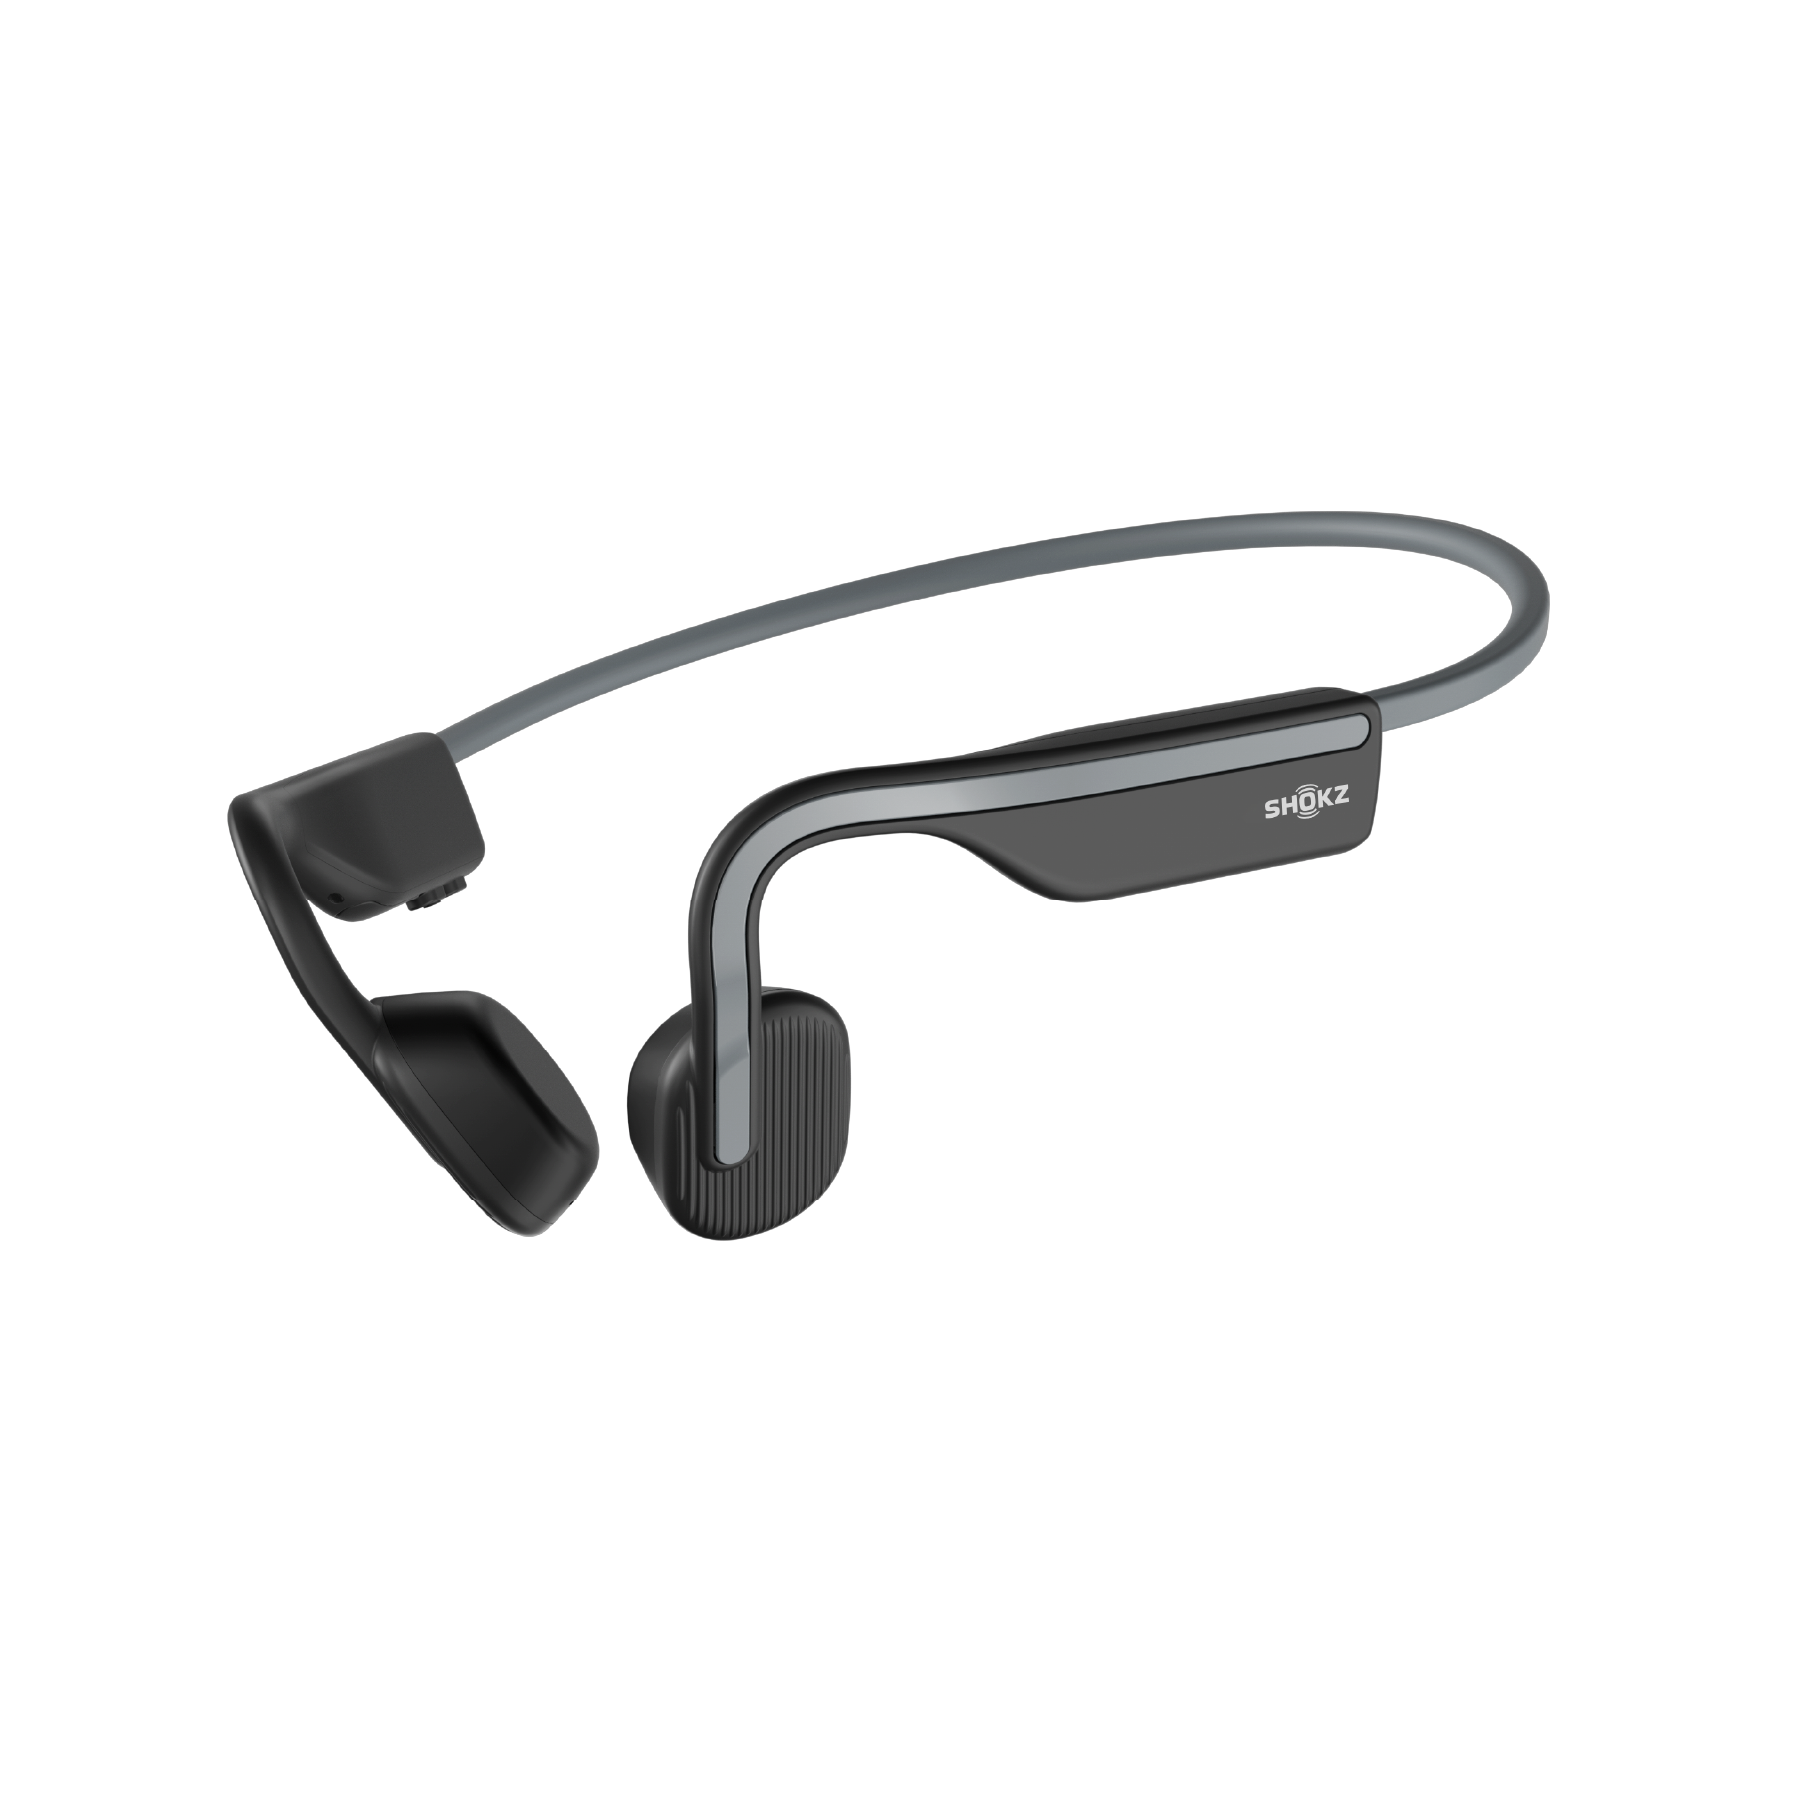 Entry Level
                  
           
          OPENMOVE
          $54.95
          LEARN MORE
        


          
           
              
              7th generation of bone conduction technology
              
            
             
              Battery Life               
              
              6 Hours
              
            
            
              Charge Time
              
              2 Hours
              
            

              
              Quick Charge
              
              /
              
            

              
              Bluetooth Versions
              
              Bluetooth® V5.1
              
            
         

                     
             
              Materials
              
              Titanium Headband Polycarbon Ear Hook
              
            

             
              Sweat & Water Resistant
              
              IP55 Sweatproof
              
            

              
              Weight
              
              29g